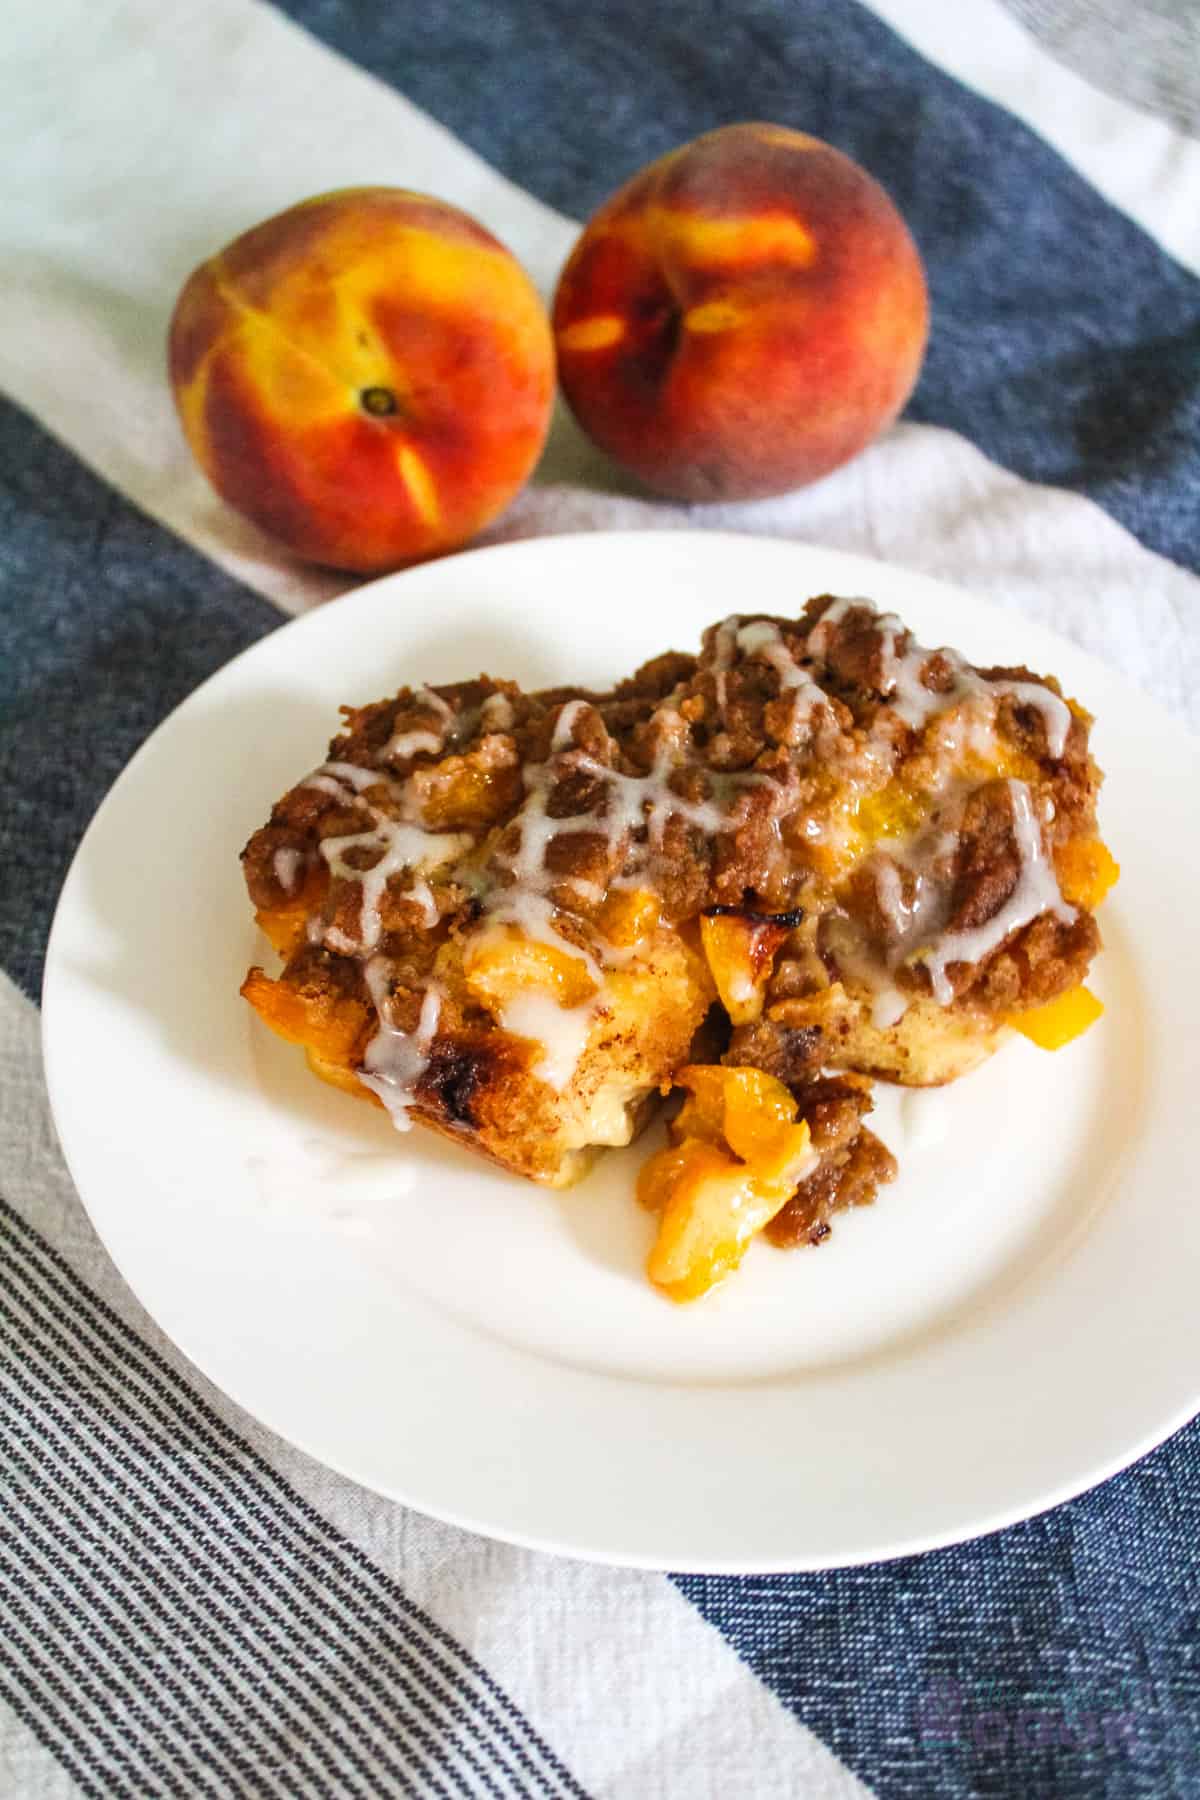 When it comes to making breakfast on Thanksgiving morning, you need recipes that are quick and simple yet still feel special. This collection of Thanksgiving breakfast recipes is full of recipes that are delicious, satisfying, and easy to make. Includes pumpkin pancakes, waffles, cinnamon rolls, oatmeal, muffins, and make-ahead breakfast casseroles that are sure to please all your holiday guests. Click through to get these Thanksgiving Breakfast recipes!! #thanksgiving #breakfast #holidayrecipes